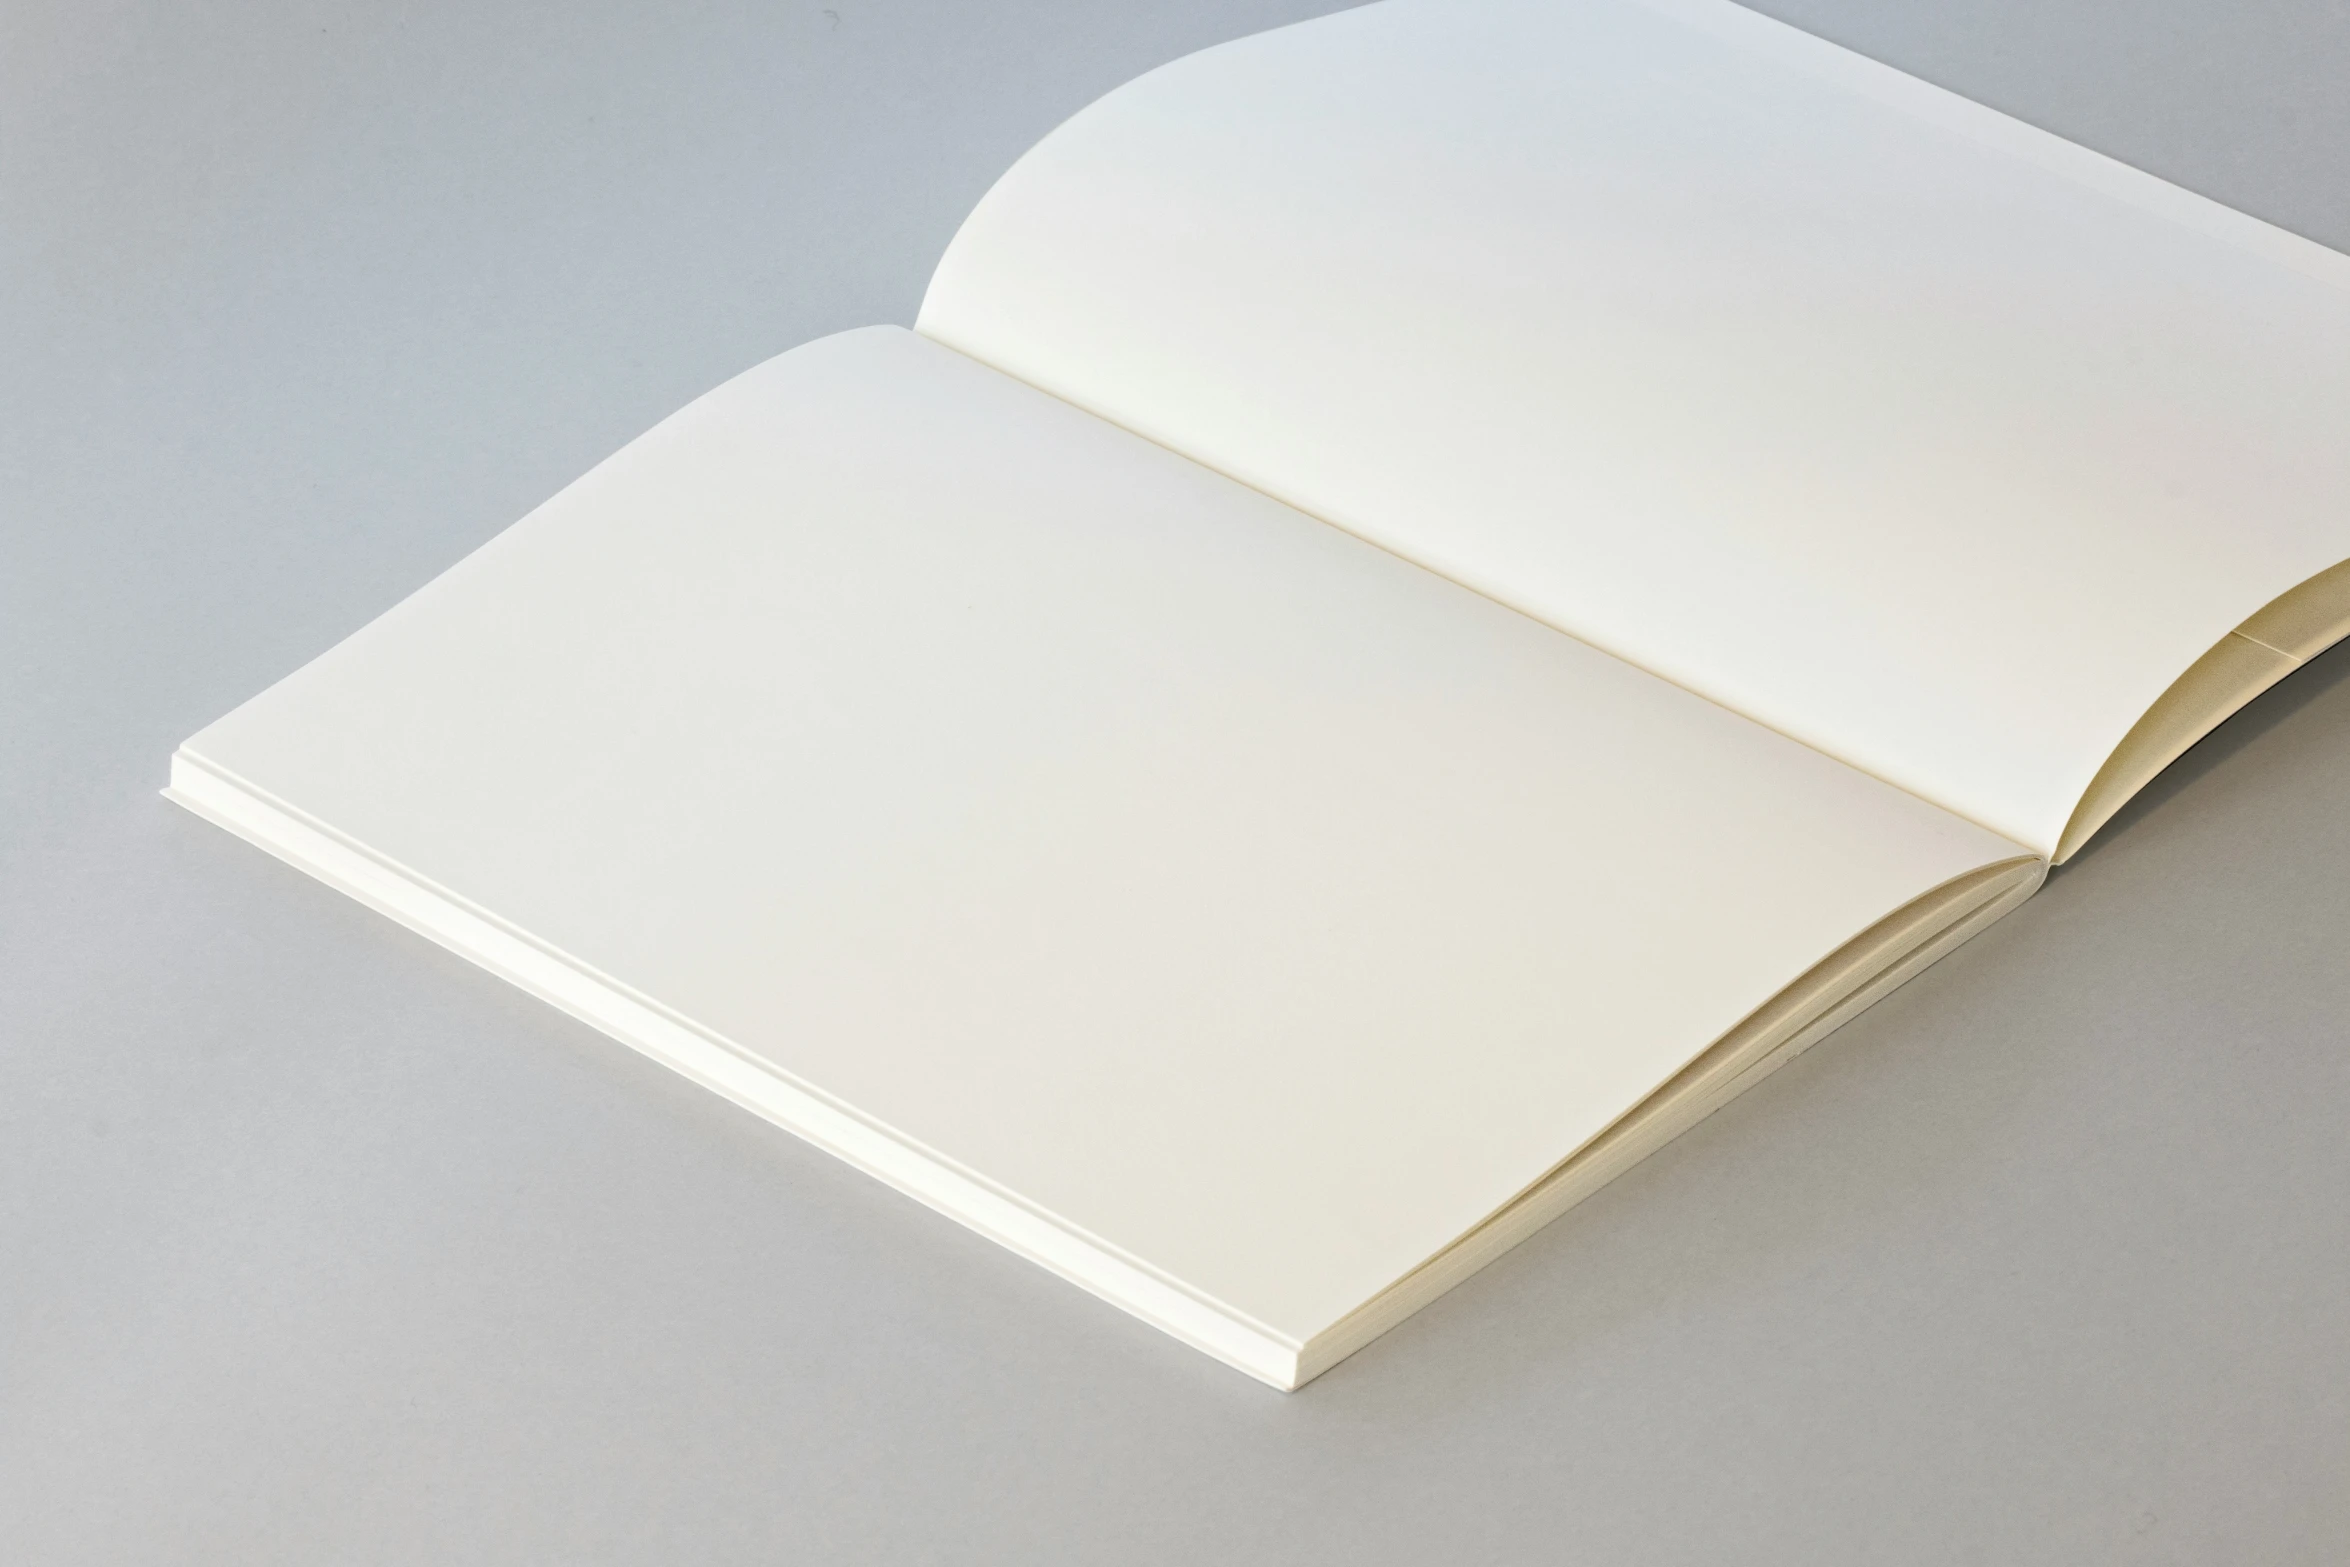 the top of an open book that is white